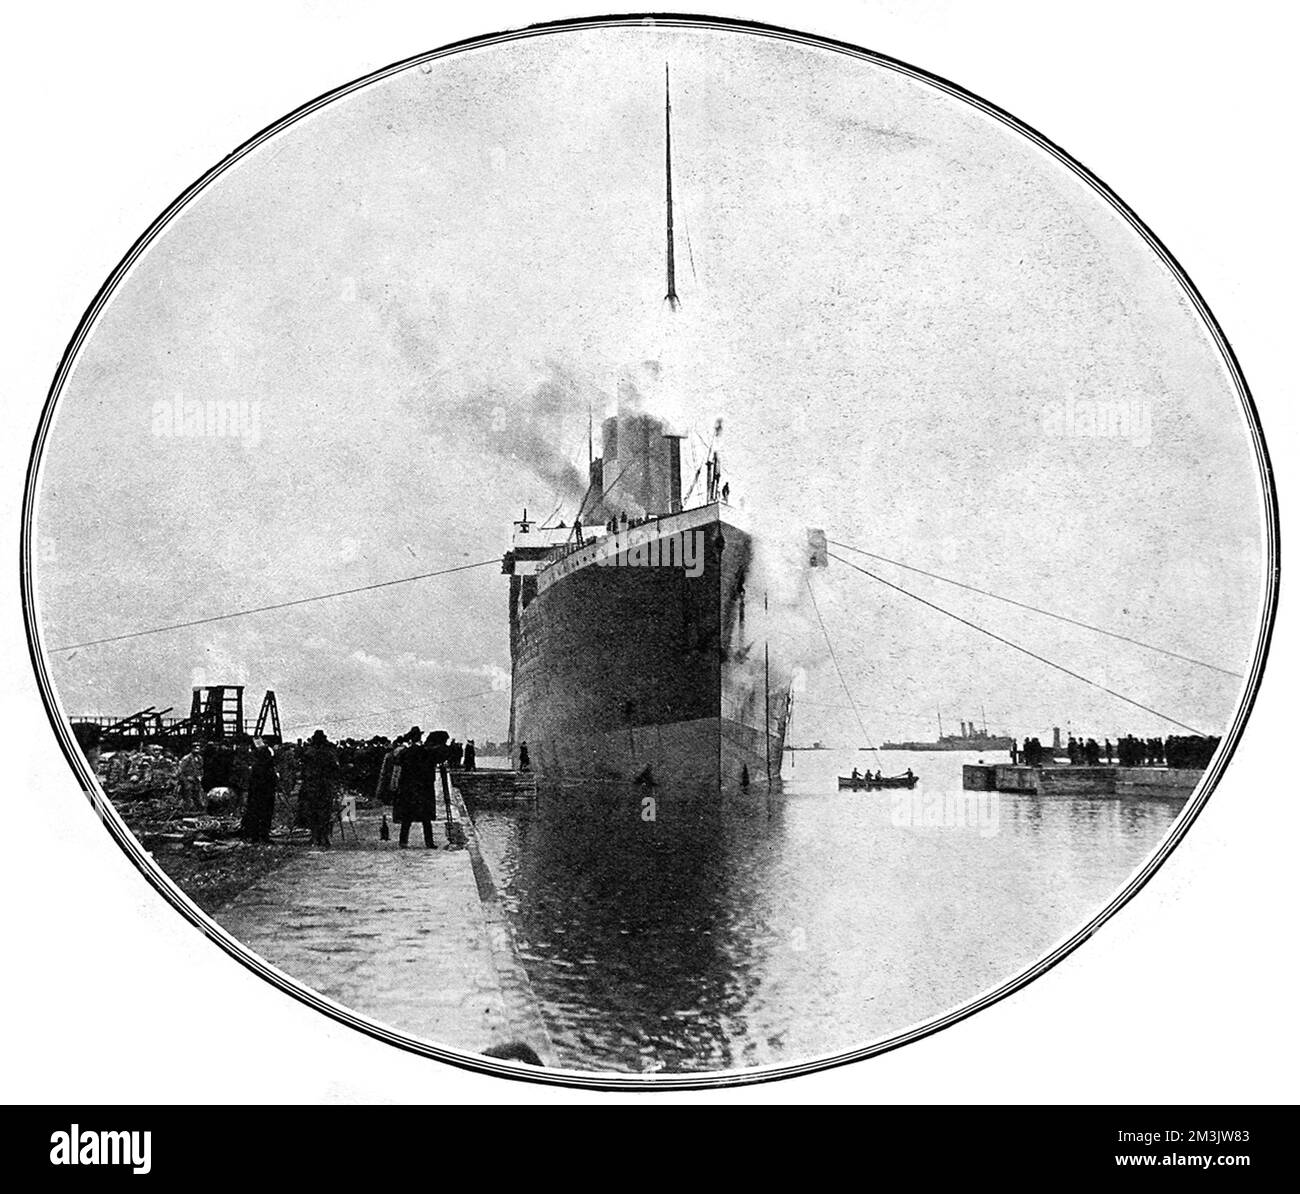 White Star Liner RMS 'Olympic', entering the Musgrove Graving Dock, Belfast, April 1911. This was the first time the world's largest ship entered the world's largest graving dock, built between 1904-1911.  'Olympic' was launched by Harland and Wolff, Belfast, in 1910 and at 882 foot long and weighing 45,000 tons, became the largest vessel then afloat. She was operated on the Atlantic service, between Britain and North America, from 1911 to 1914. Following the disaster of the 'Titanic', White Star Line sent 'Olympic' to Harland and Wolff for modifications - larger watertight doors and Stock Photo